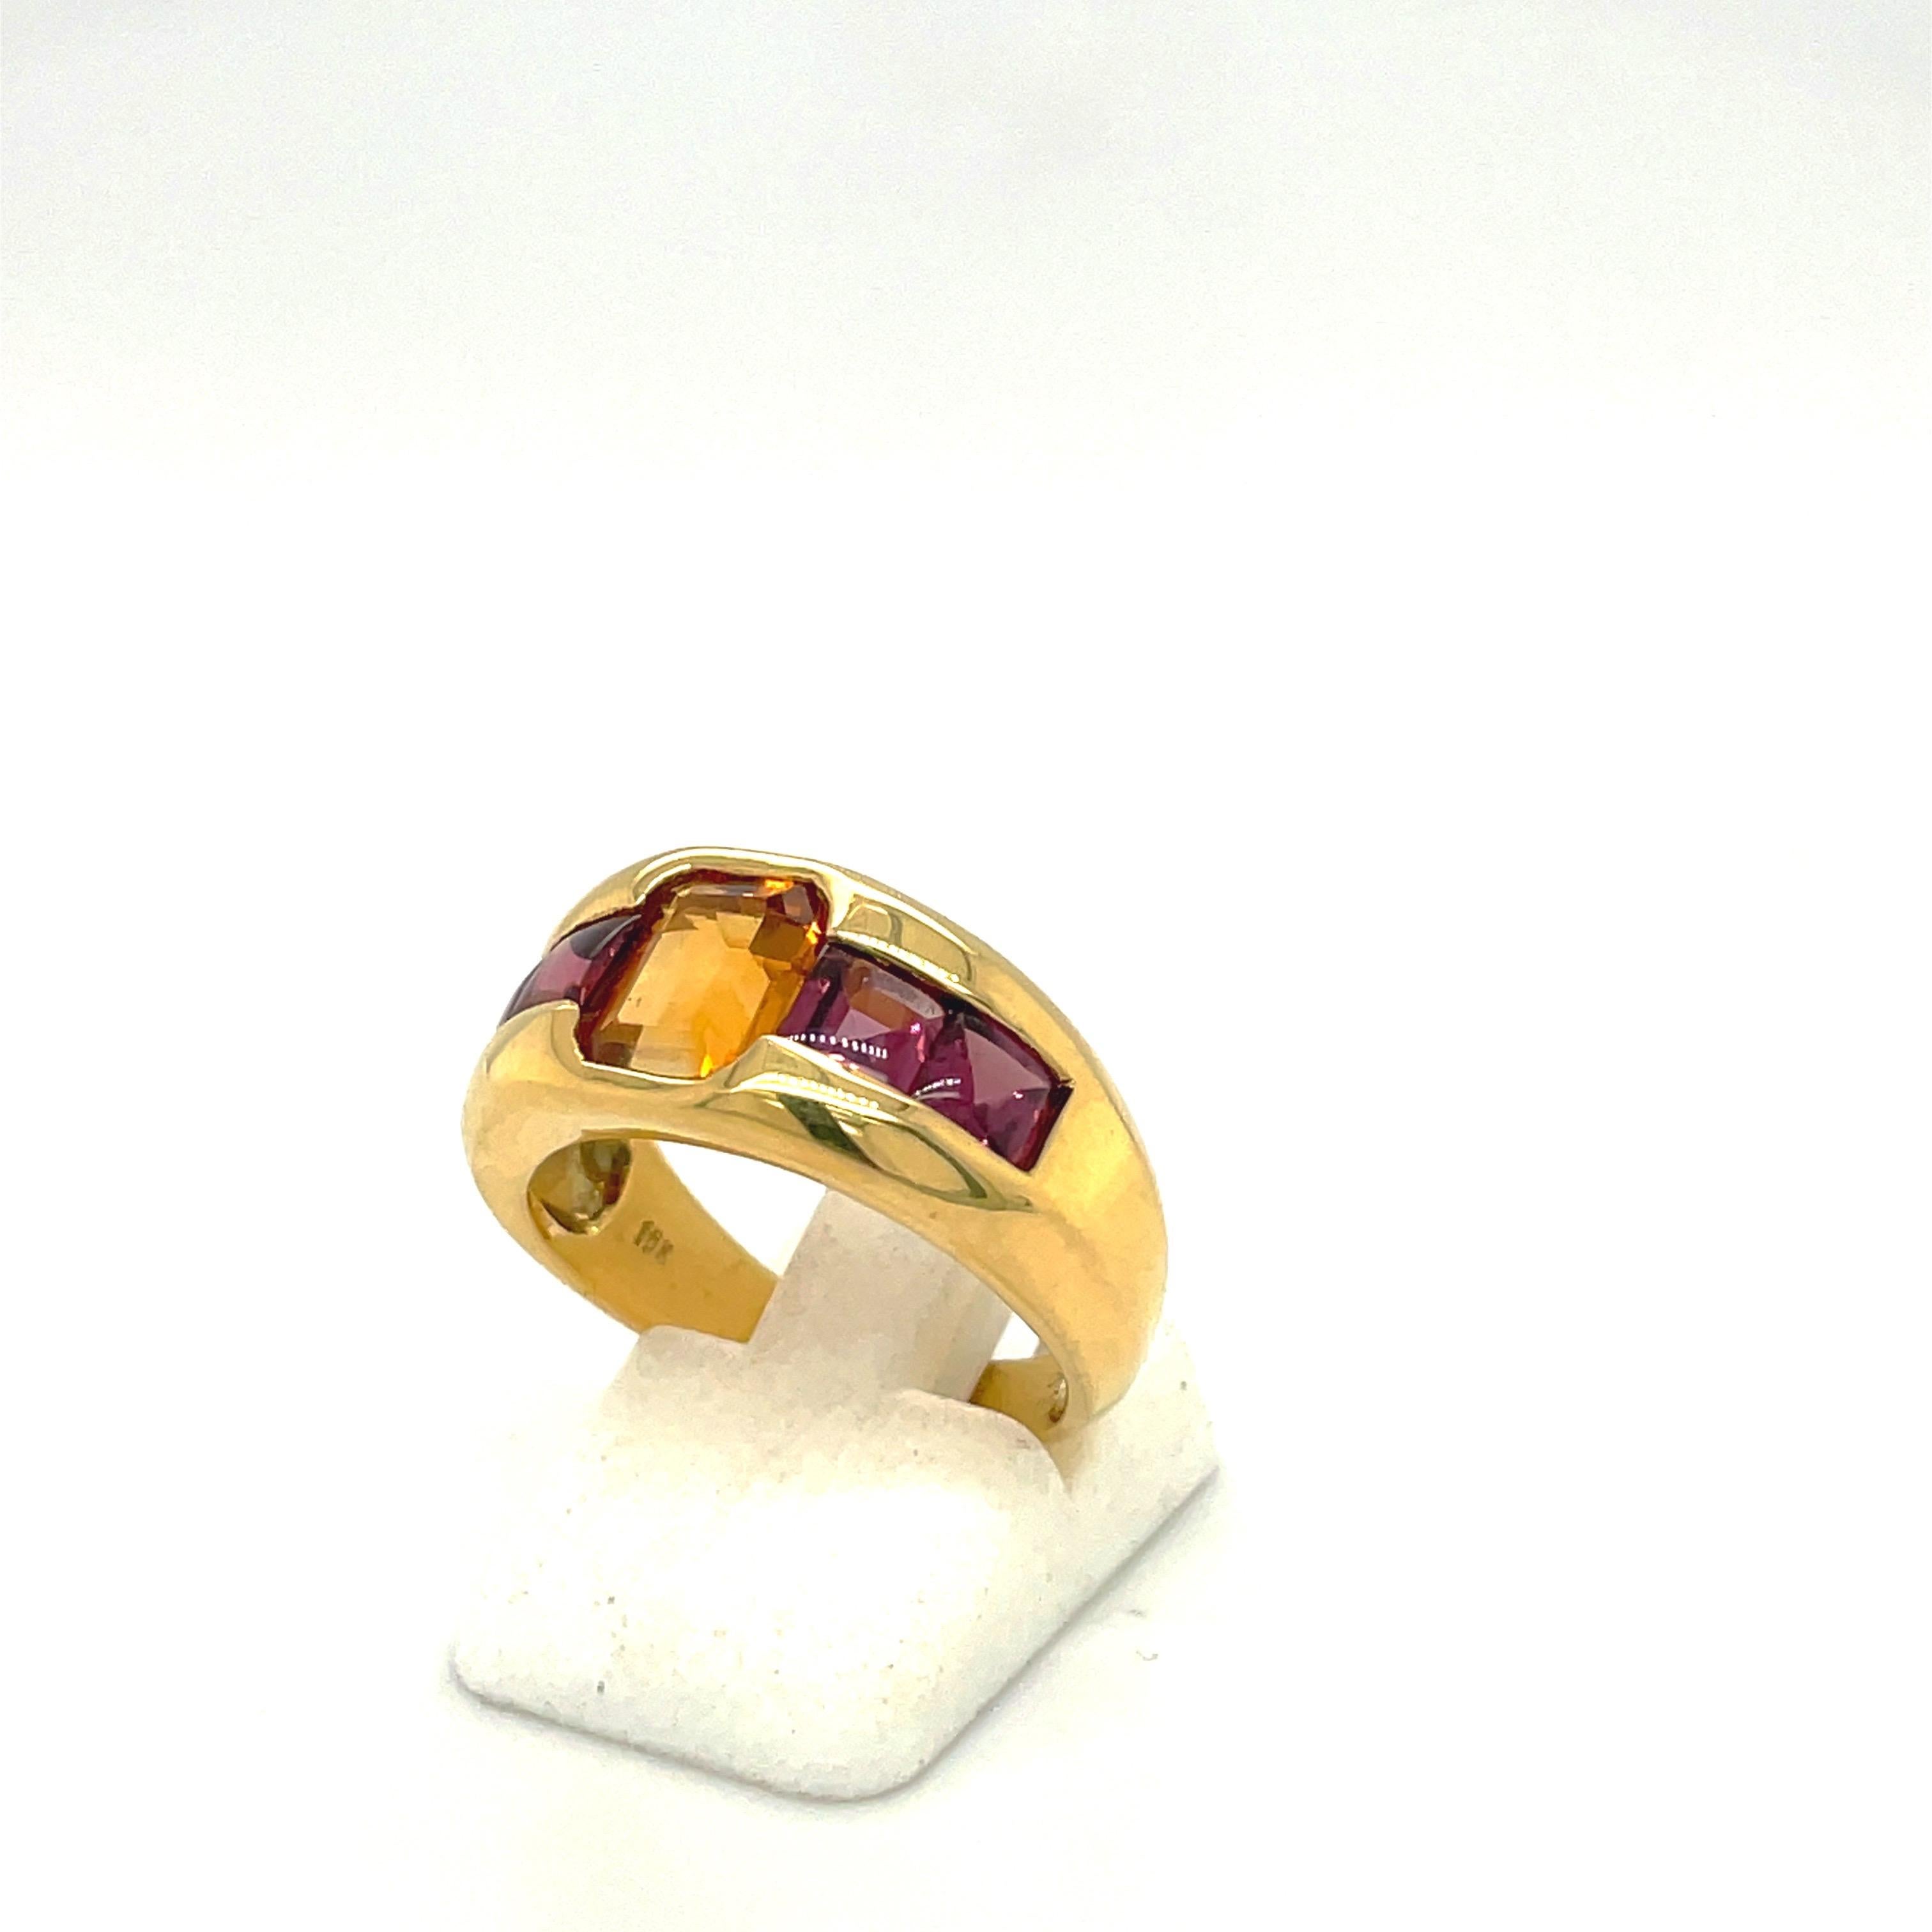 Gregg Ruth 18KT Yellow Gold Ring with 1.34Ct. Citrine Center & 1.59Ct. Rhodolite For Sale 1